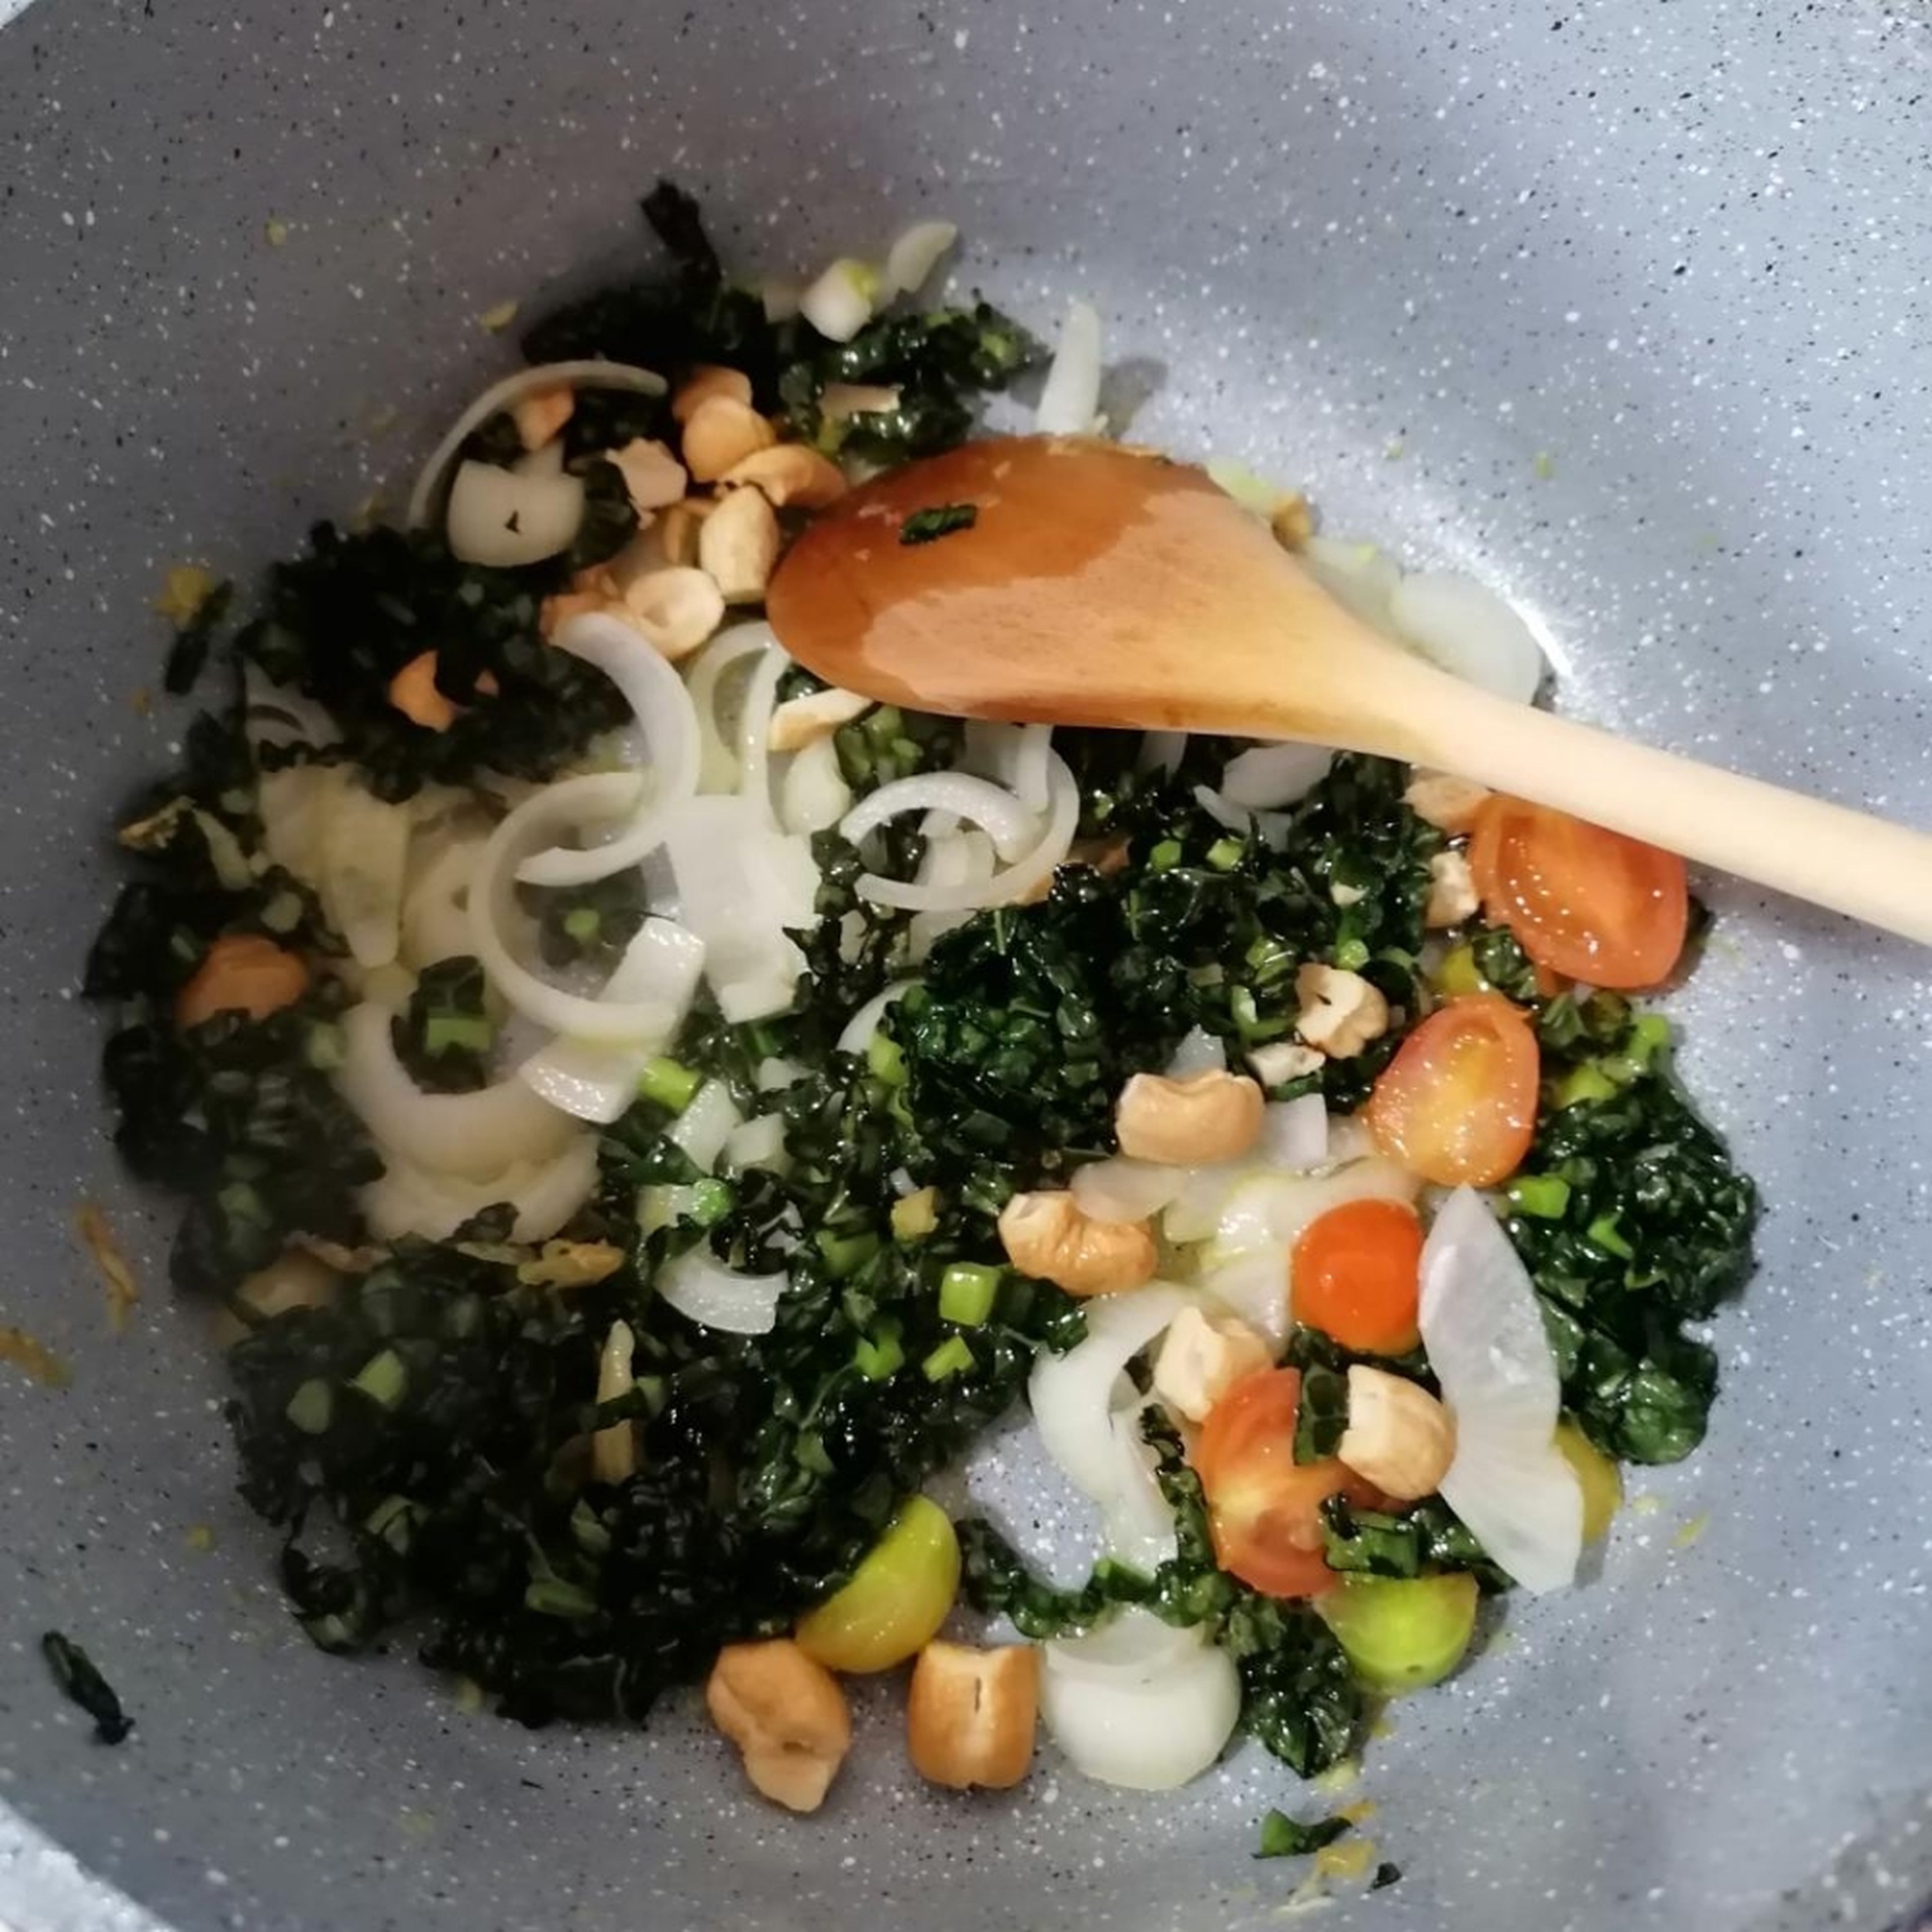 Add the kale, tomatoes and cashew nuts and cook for 7 minutes.